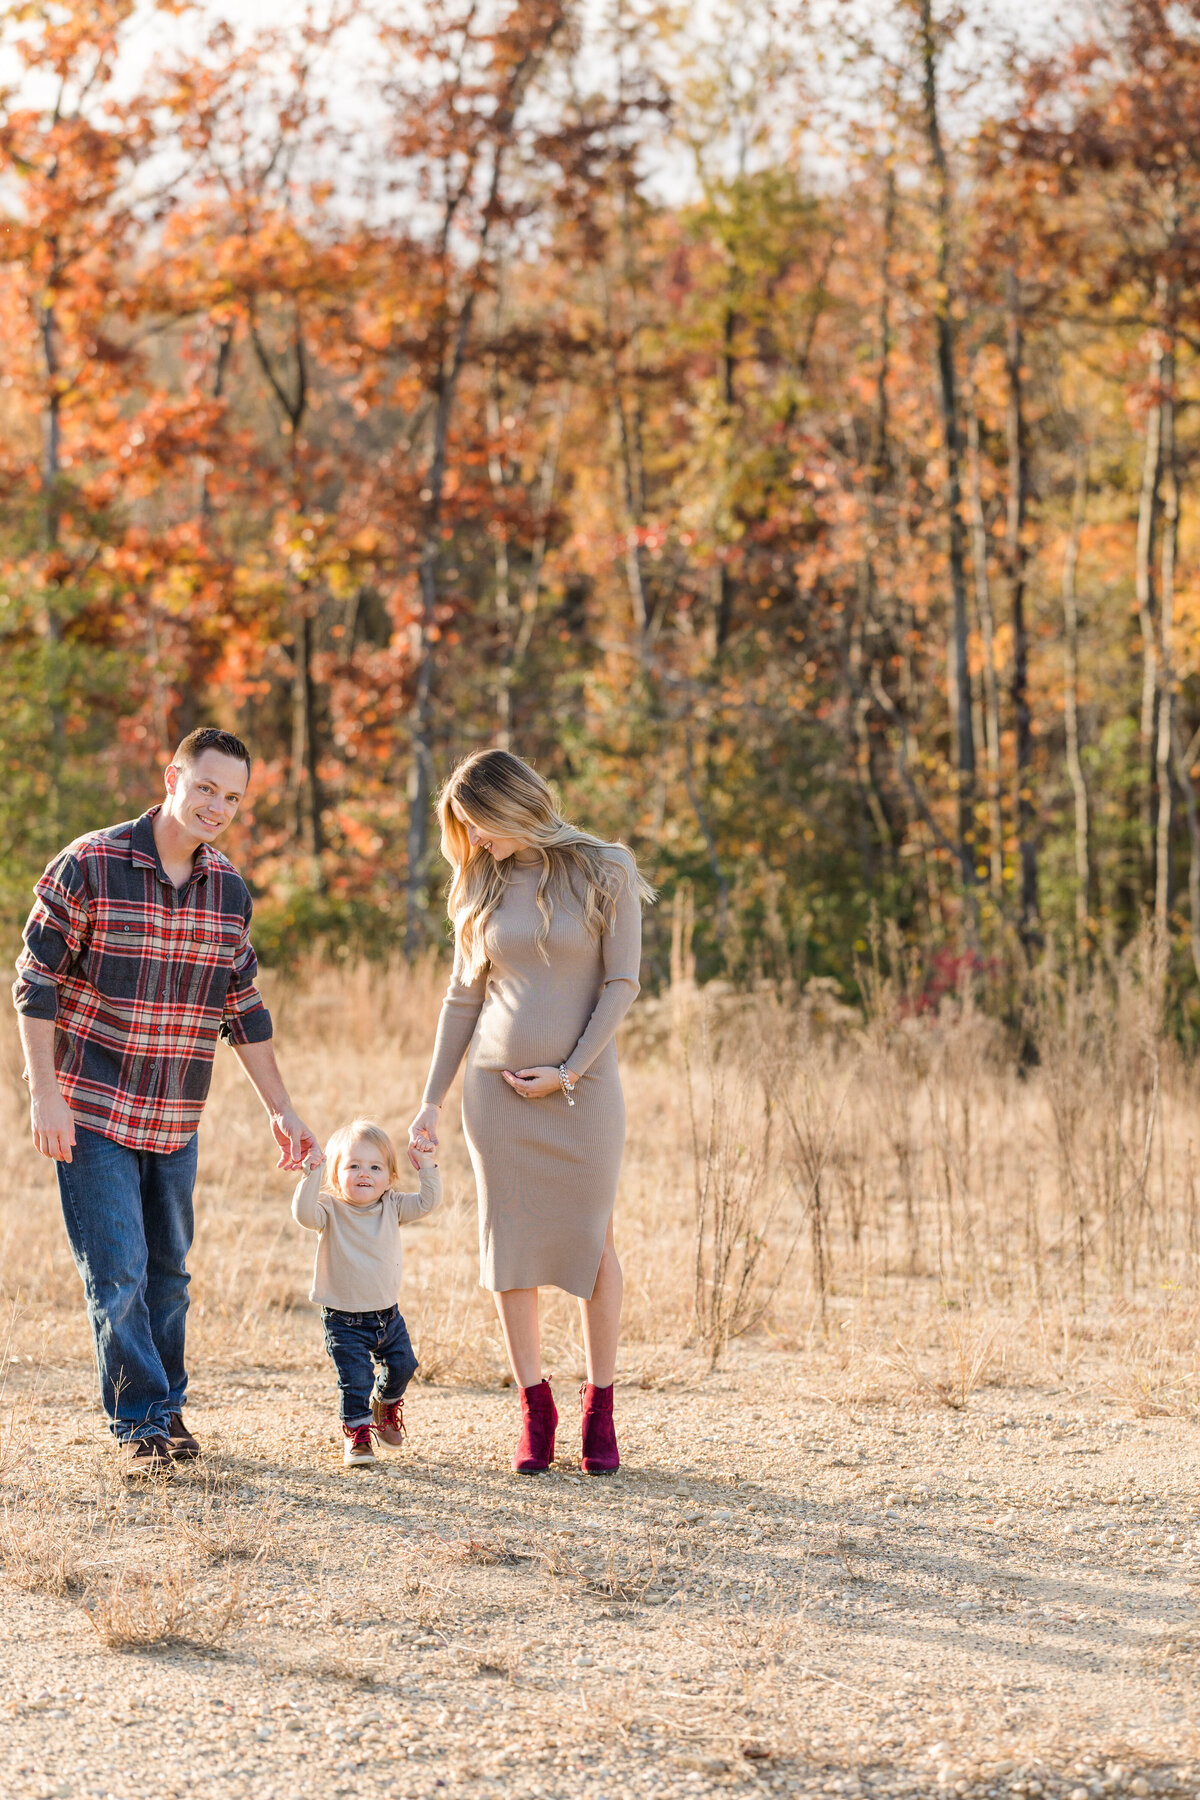 Kait & Dave Gender Reveal - Taylor'd Southern Events - Maryland Photographer -1752